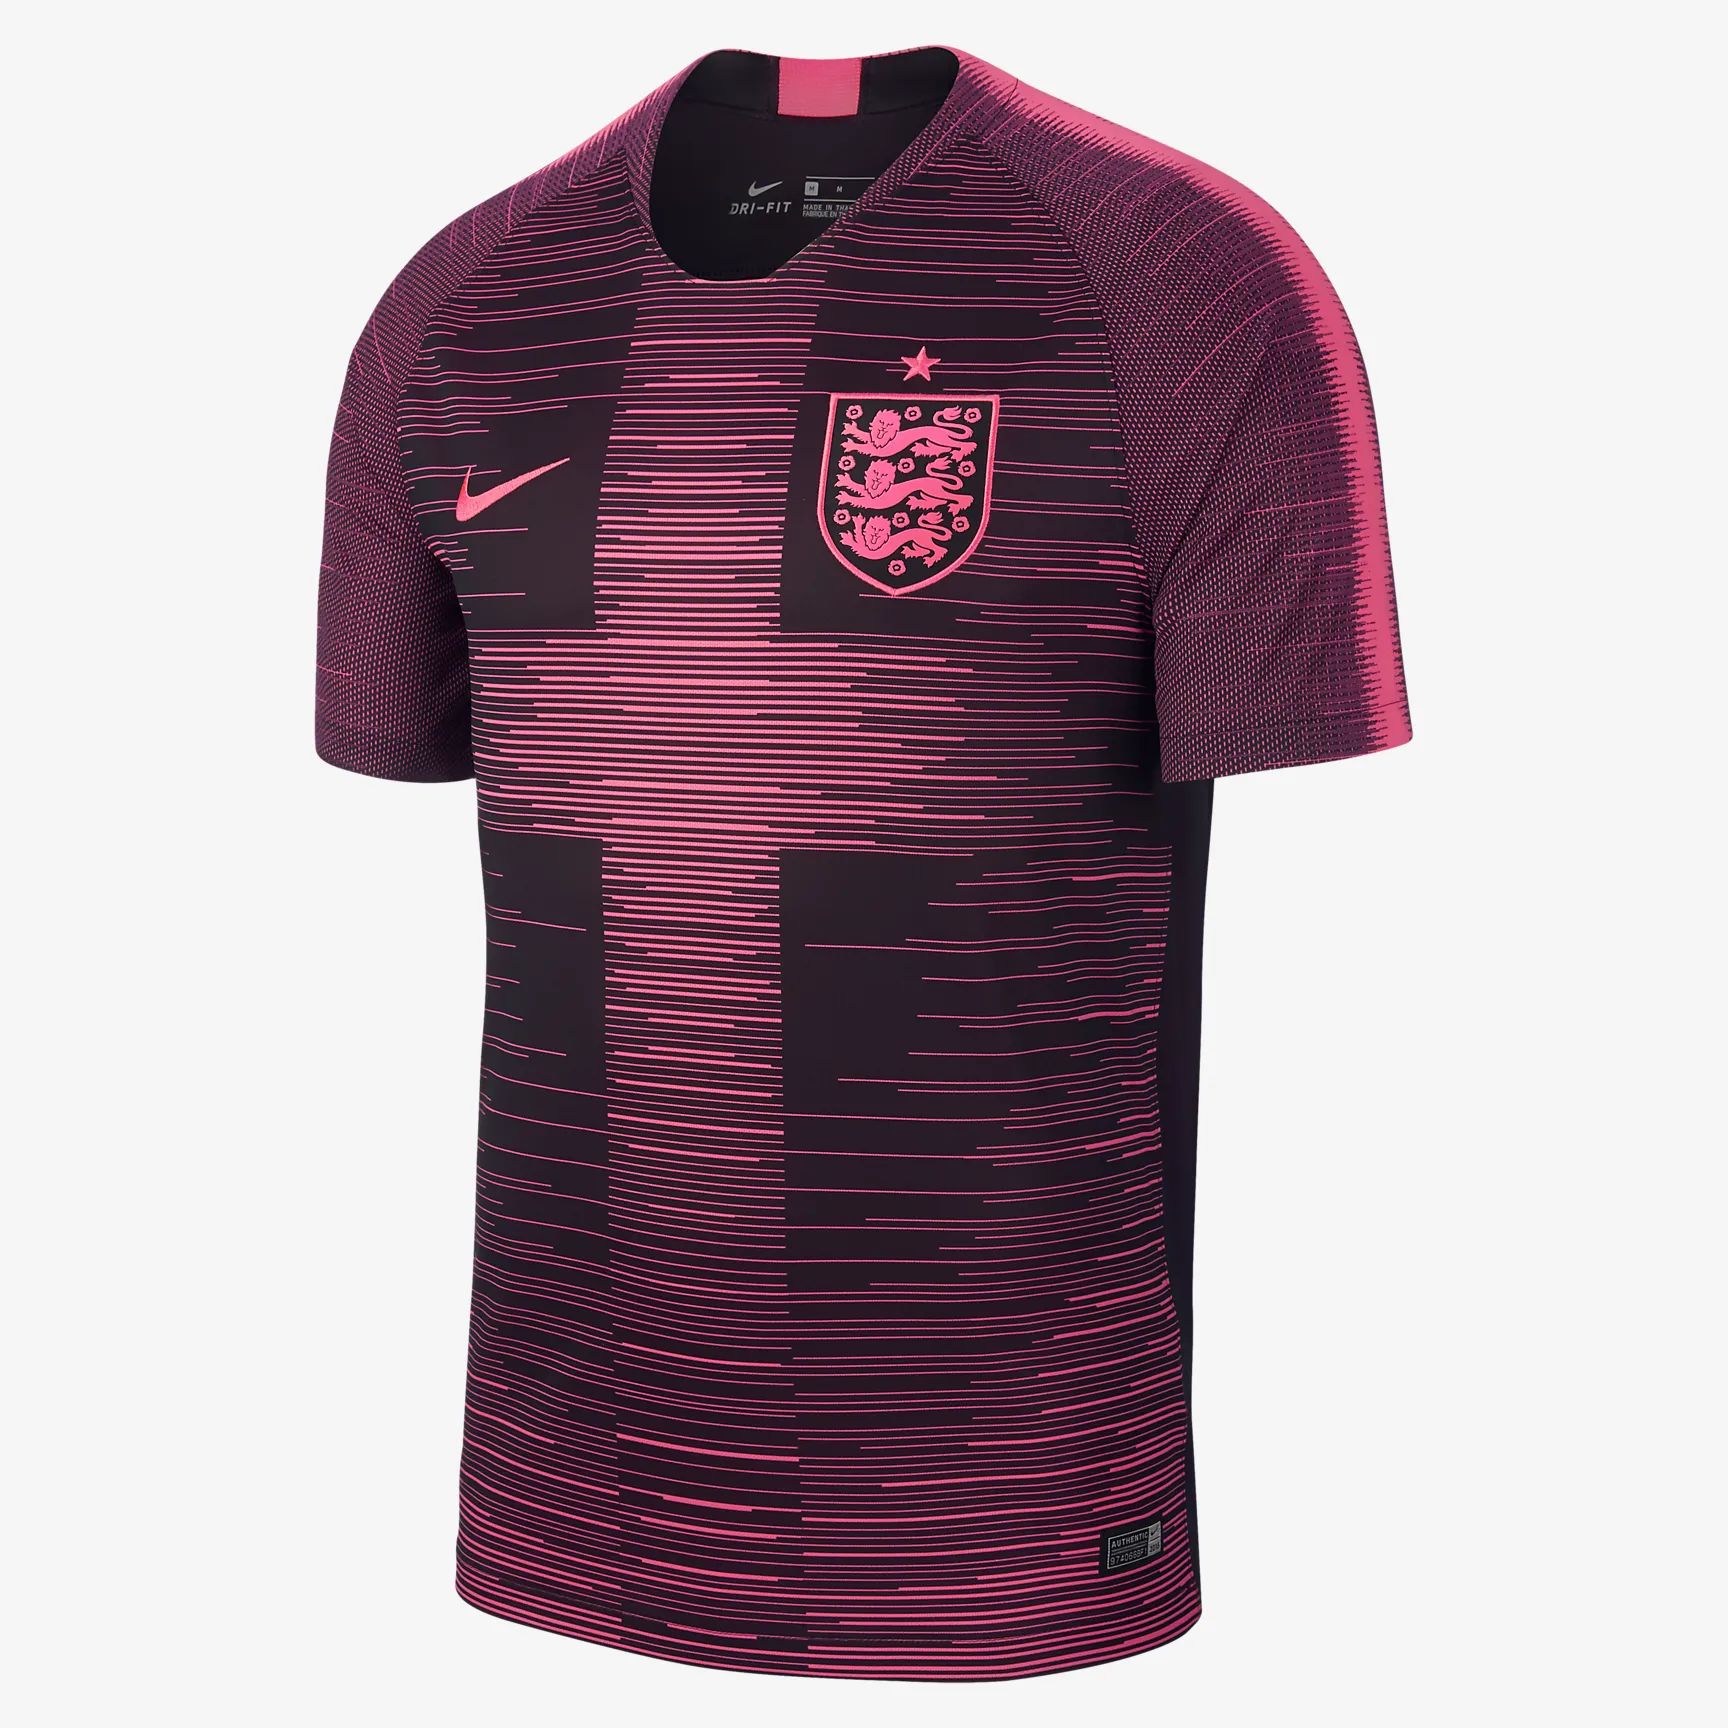 England Training Shirt 2018  pre match volt limited edition Red Pink  Size Med 